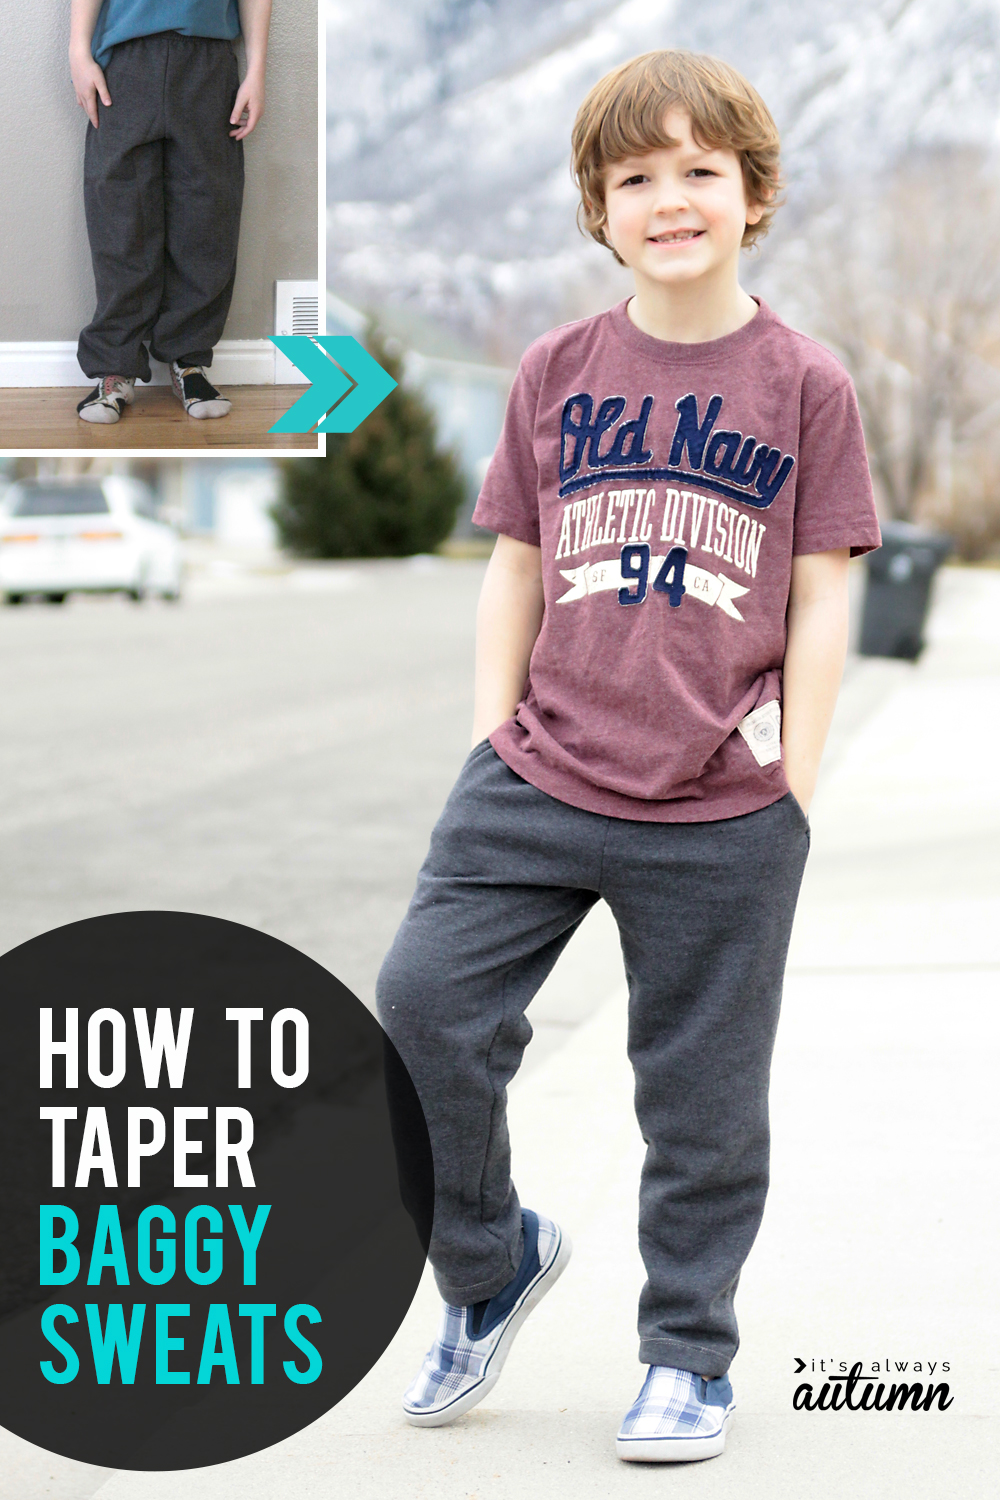 How to taper baggy sweatpants! Easy sewing tutorial for giving old baggy sweatpants a slimmer fit.